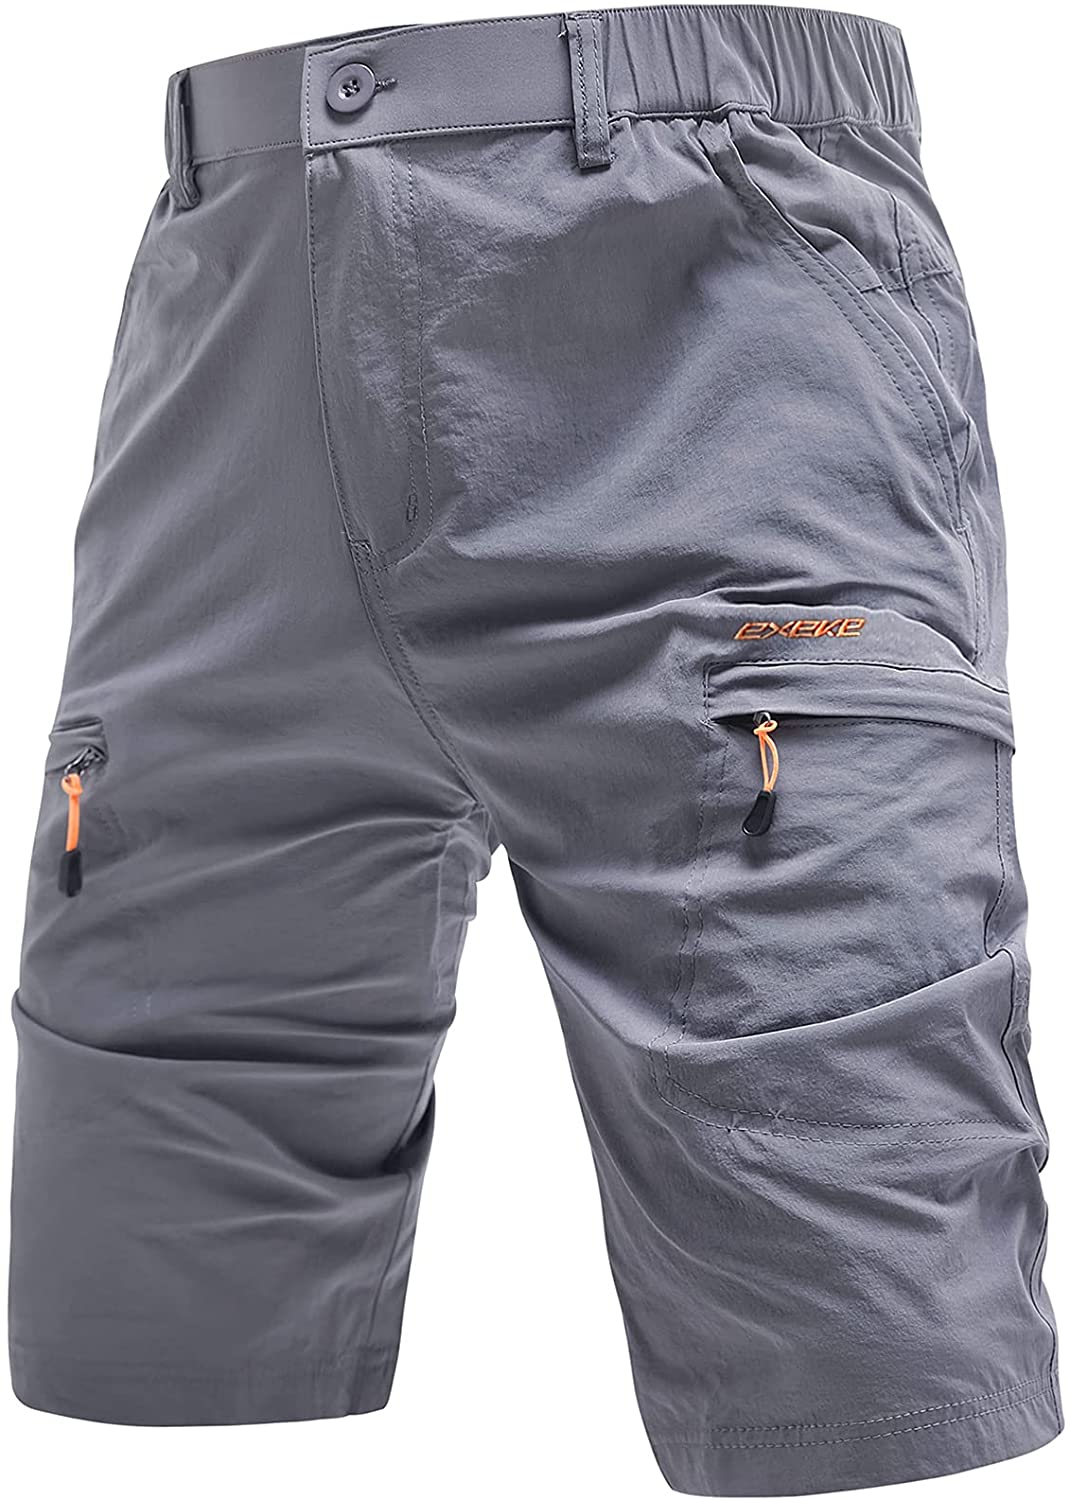 EXEKE Outdoor Mens Quick Dry Shorts Lightweight Hiking Shorts